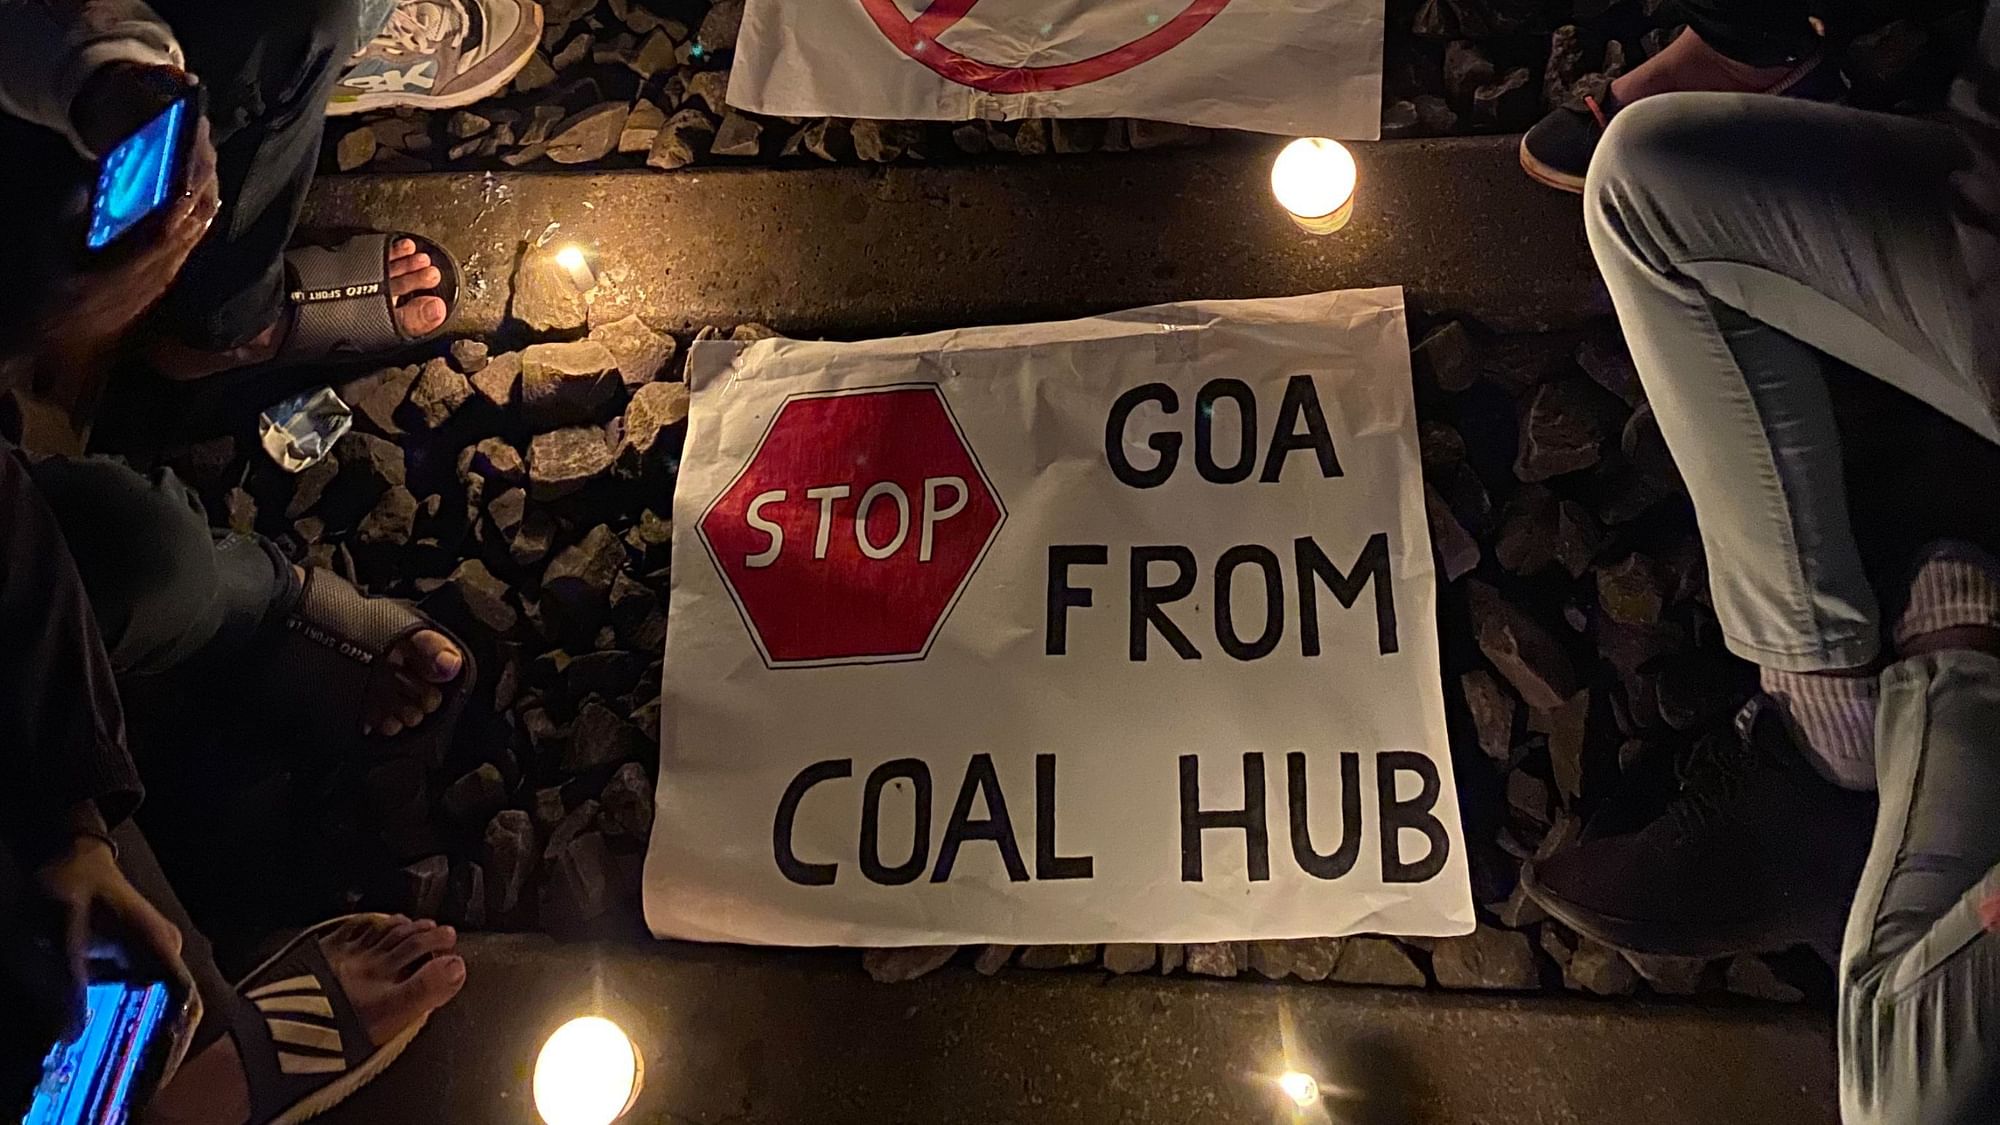 The controversial <a href="https://www.thequint.com/news/india/goa-environmentalists-protests-over-railway-track">track-laying work</a> in Davorlim village was postponed citing “operational constraints”.